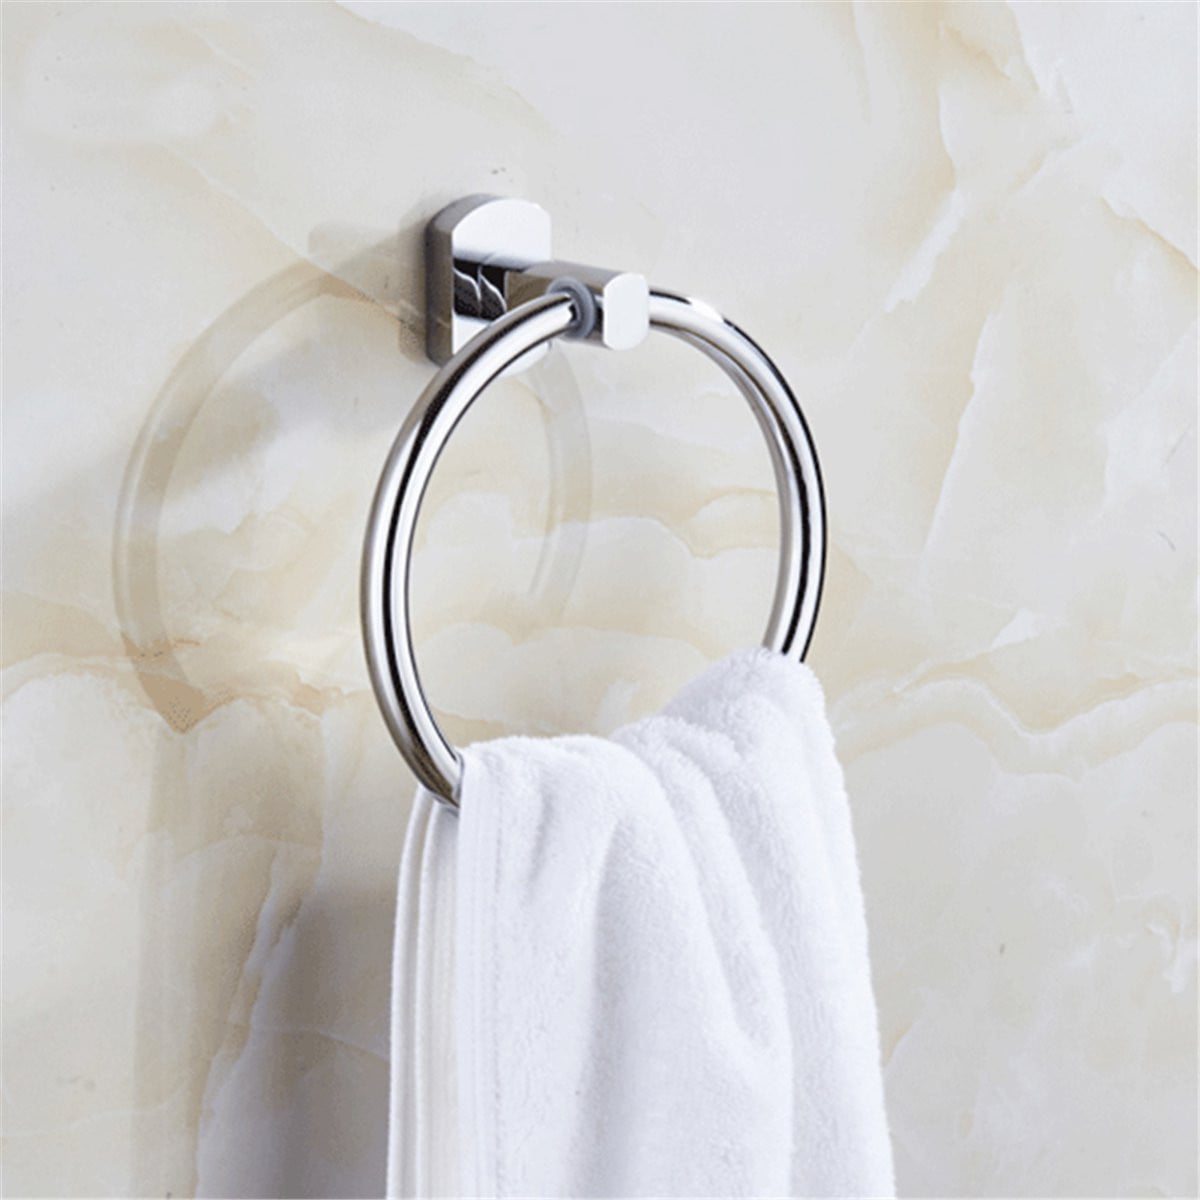 iBathUK Traditional Chrome Towel Ring Holder Wall Mount Round Bathroom Accessory 